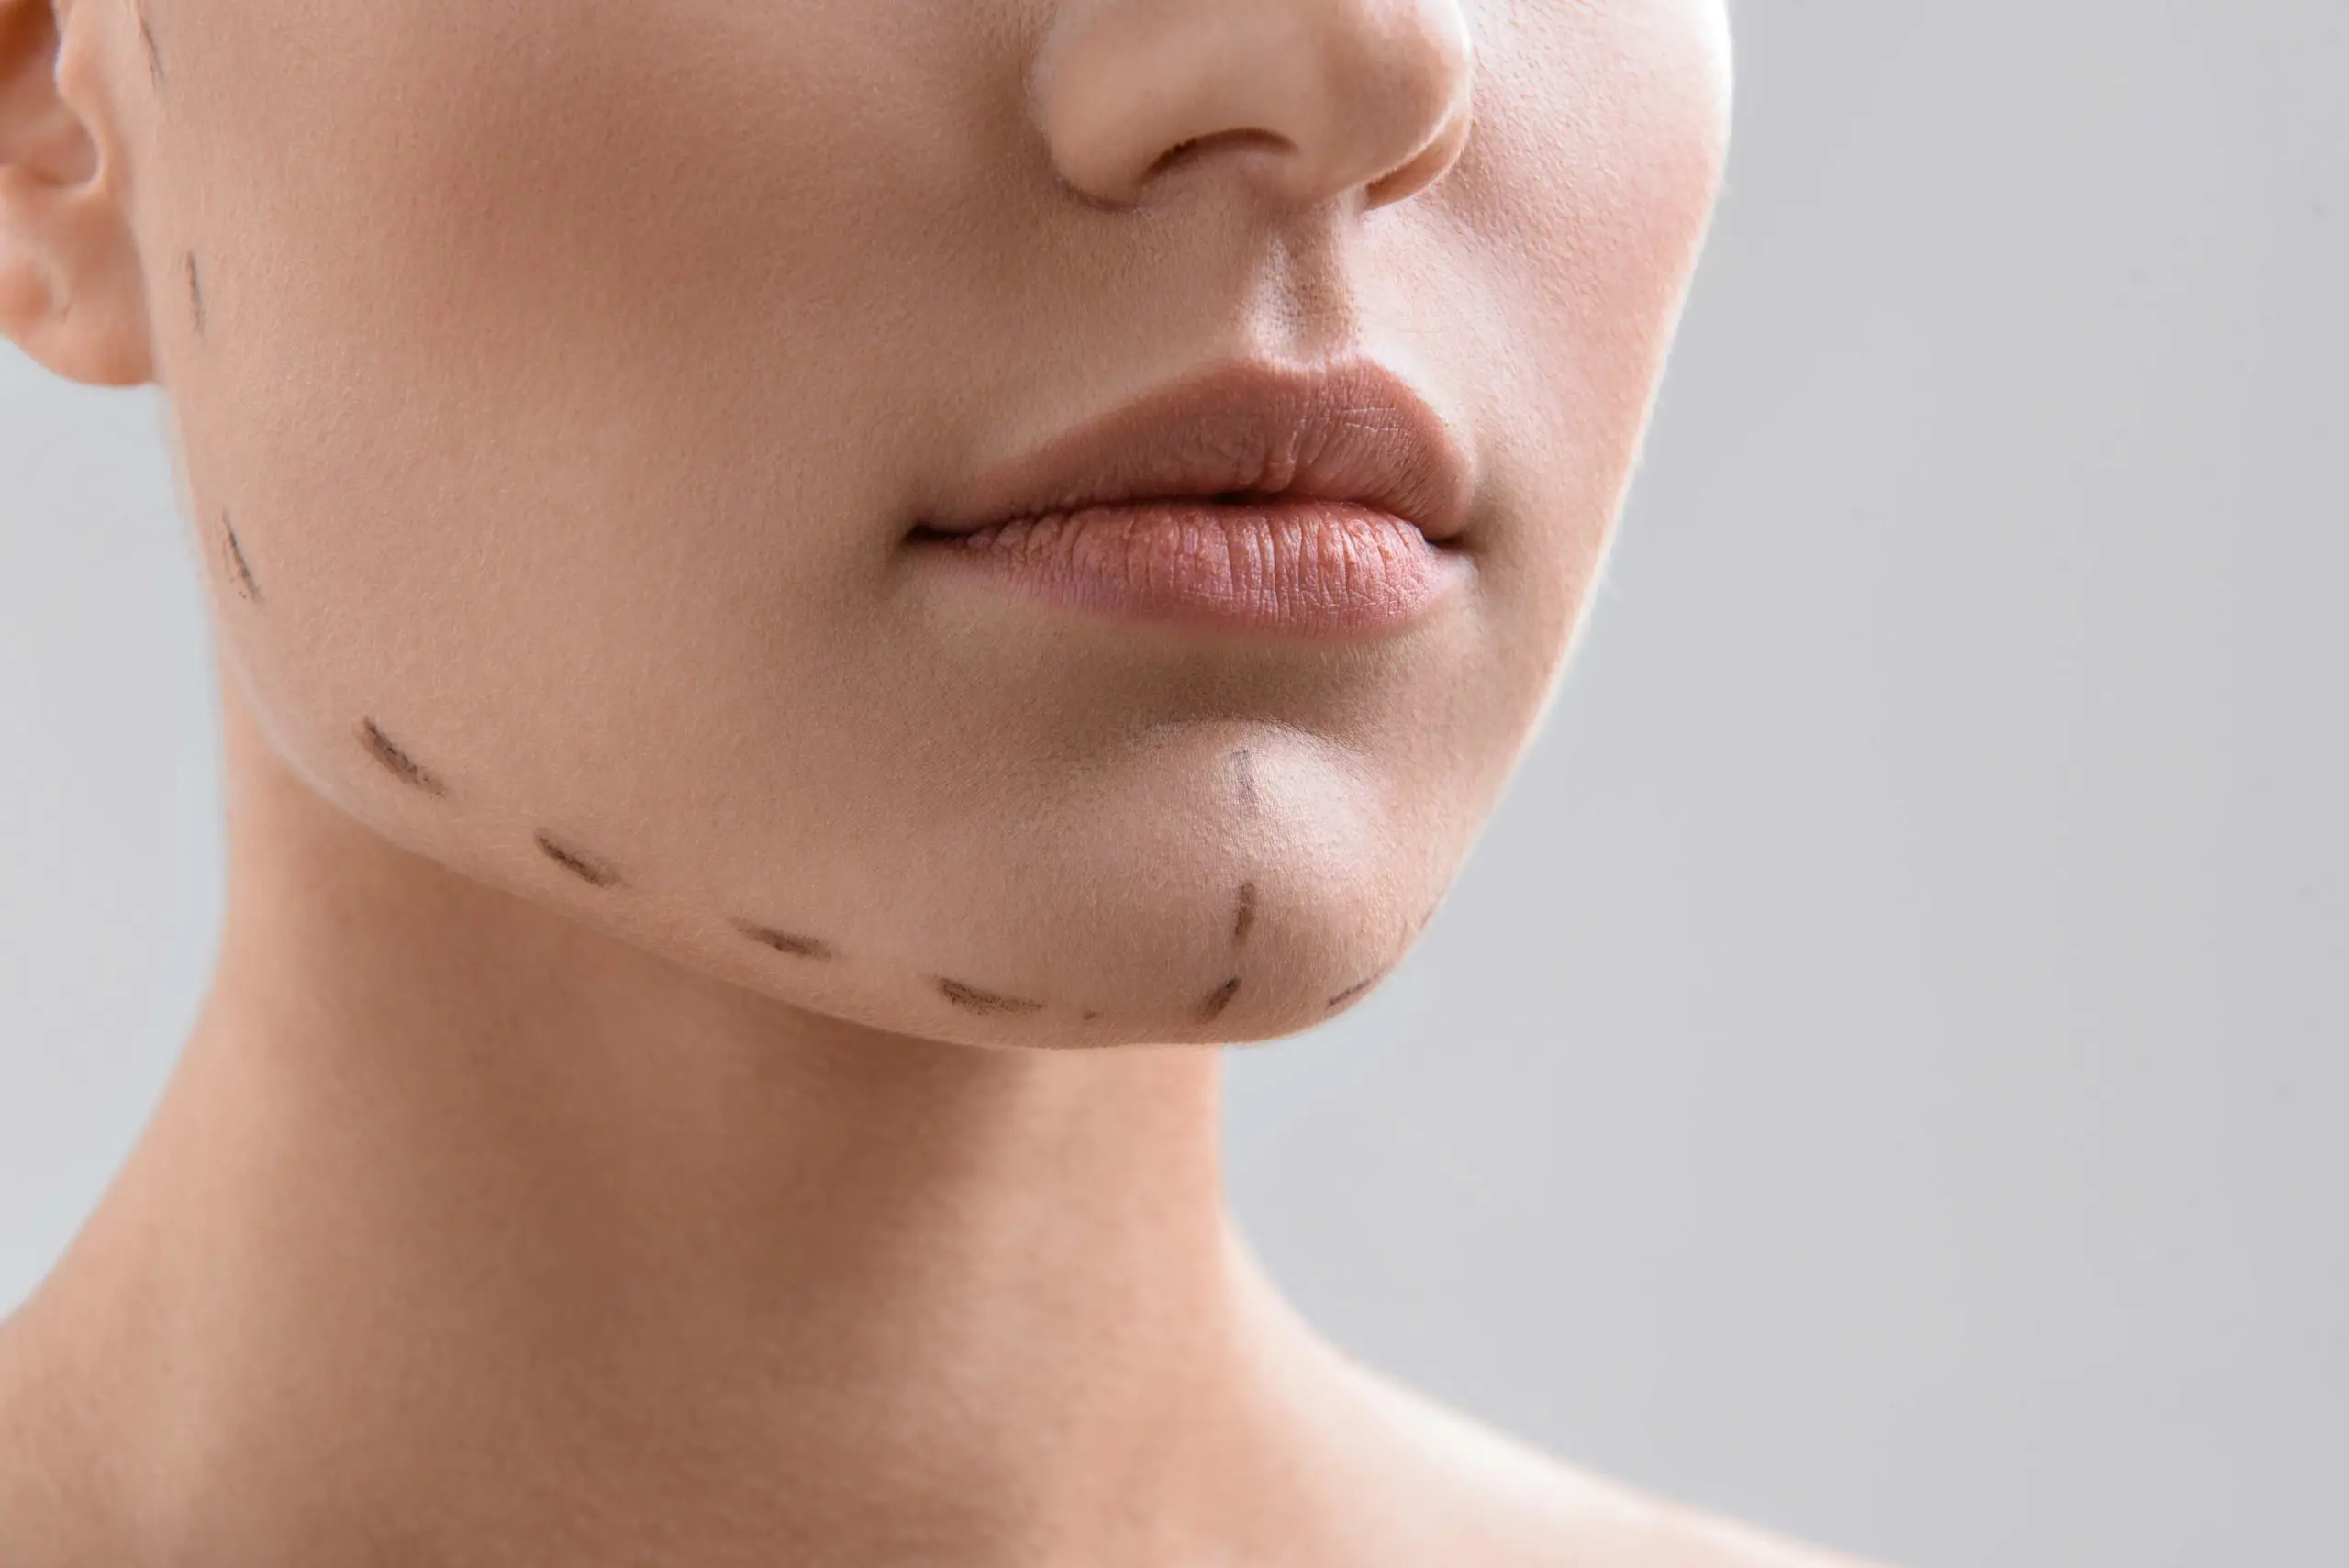 Chin surgery recovery and results